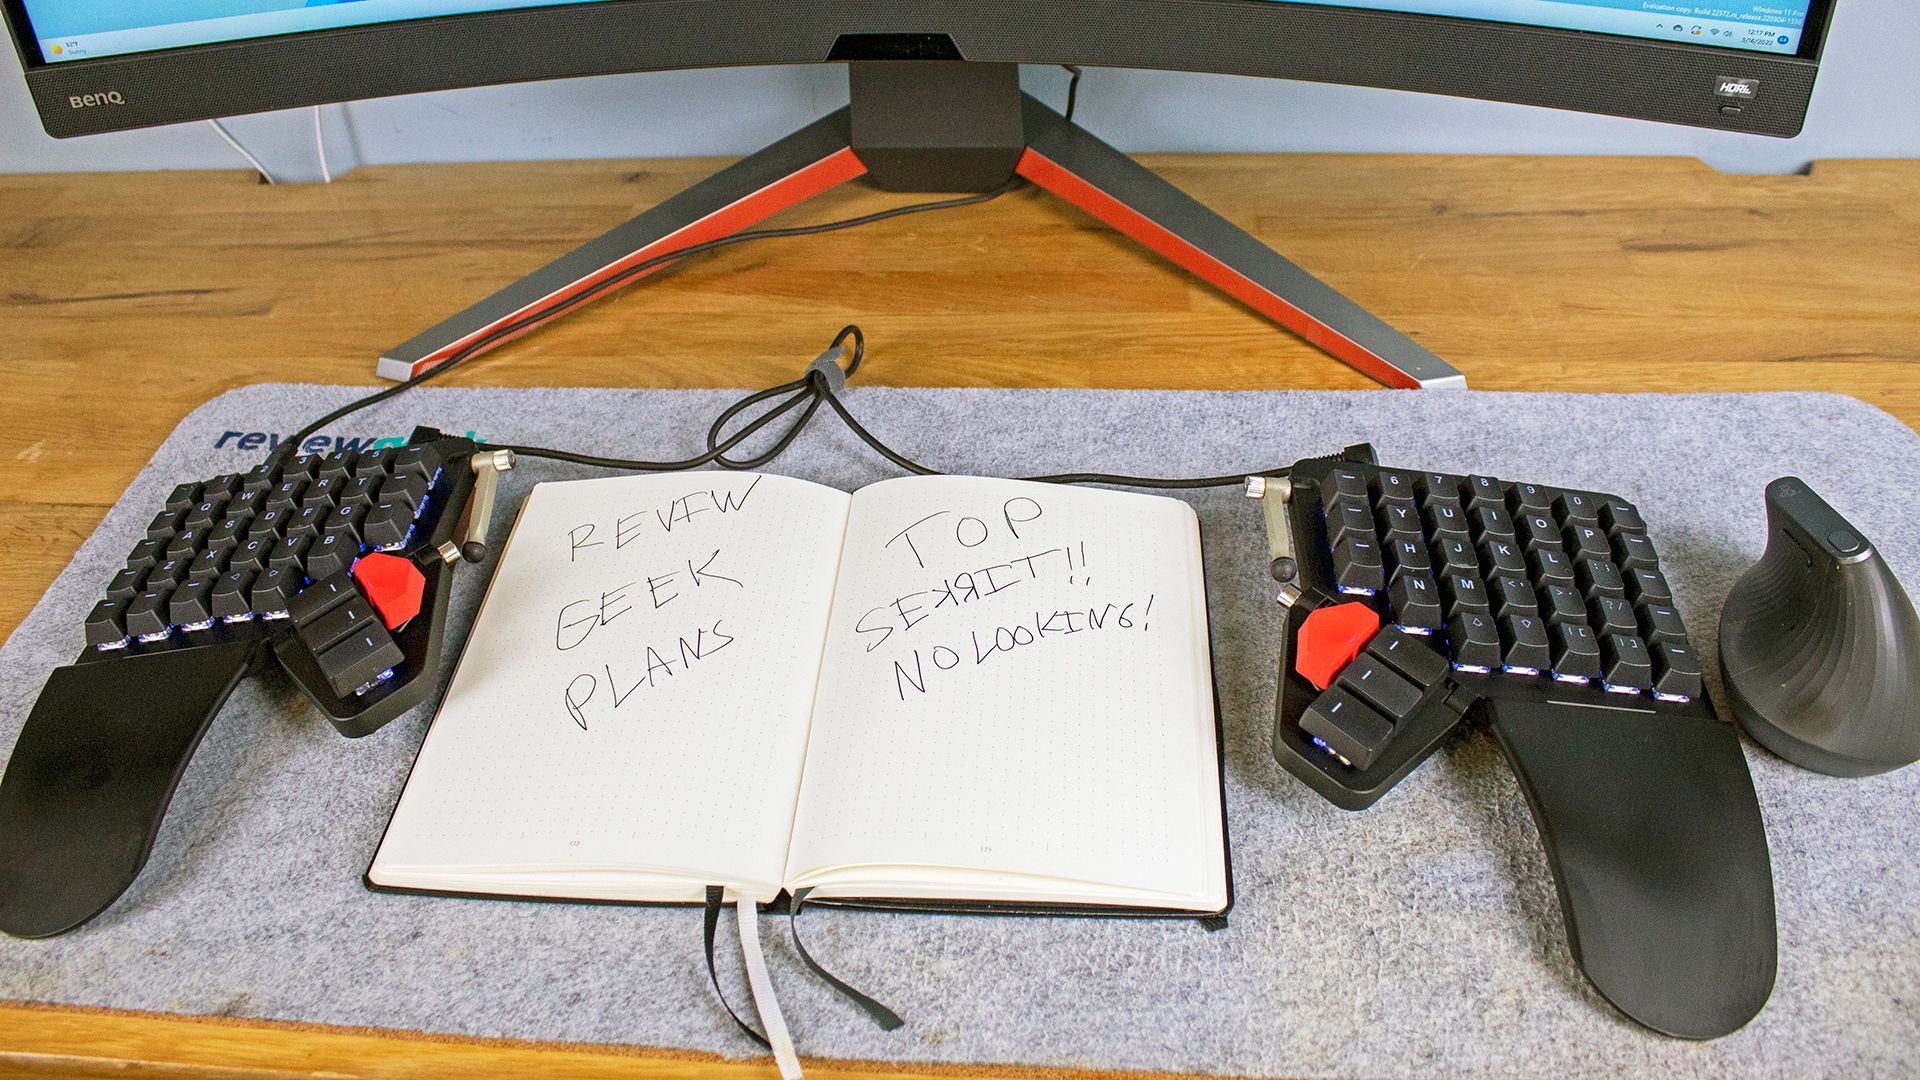 A Moonlander keyboard with a bullet journal between the halves